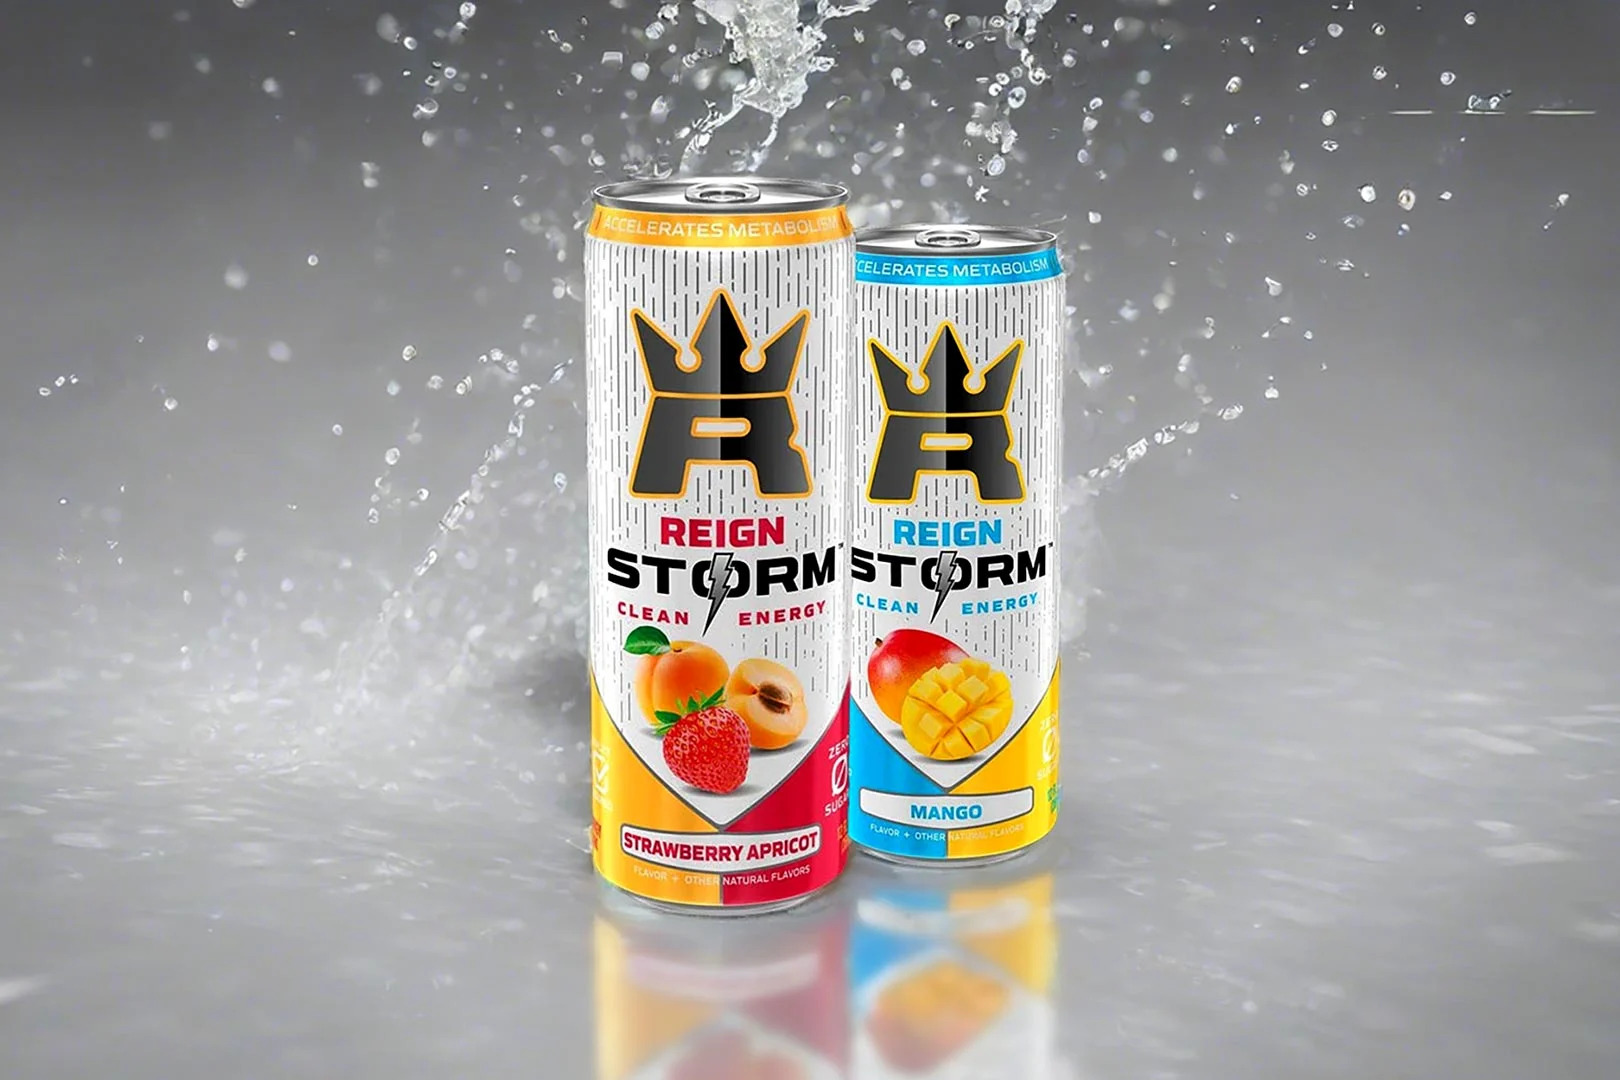 20-energizing-facts-about-reign-storm-drink